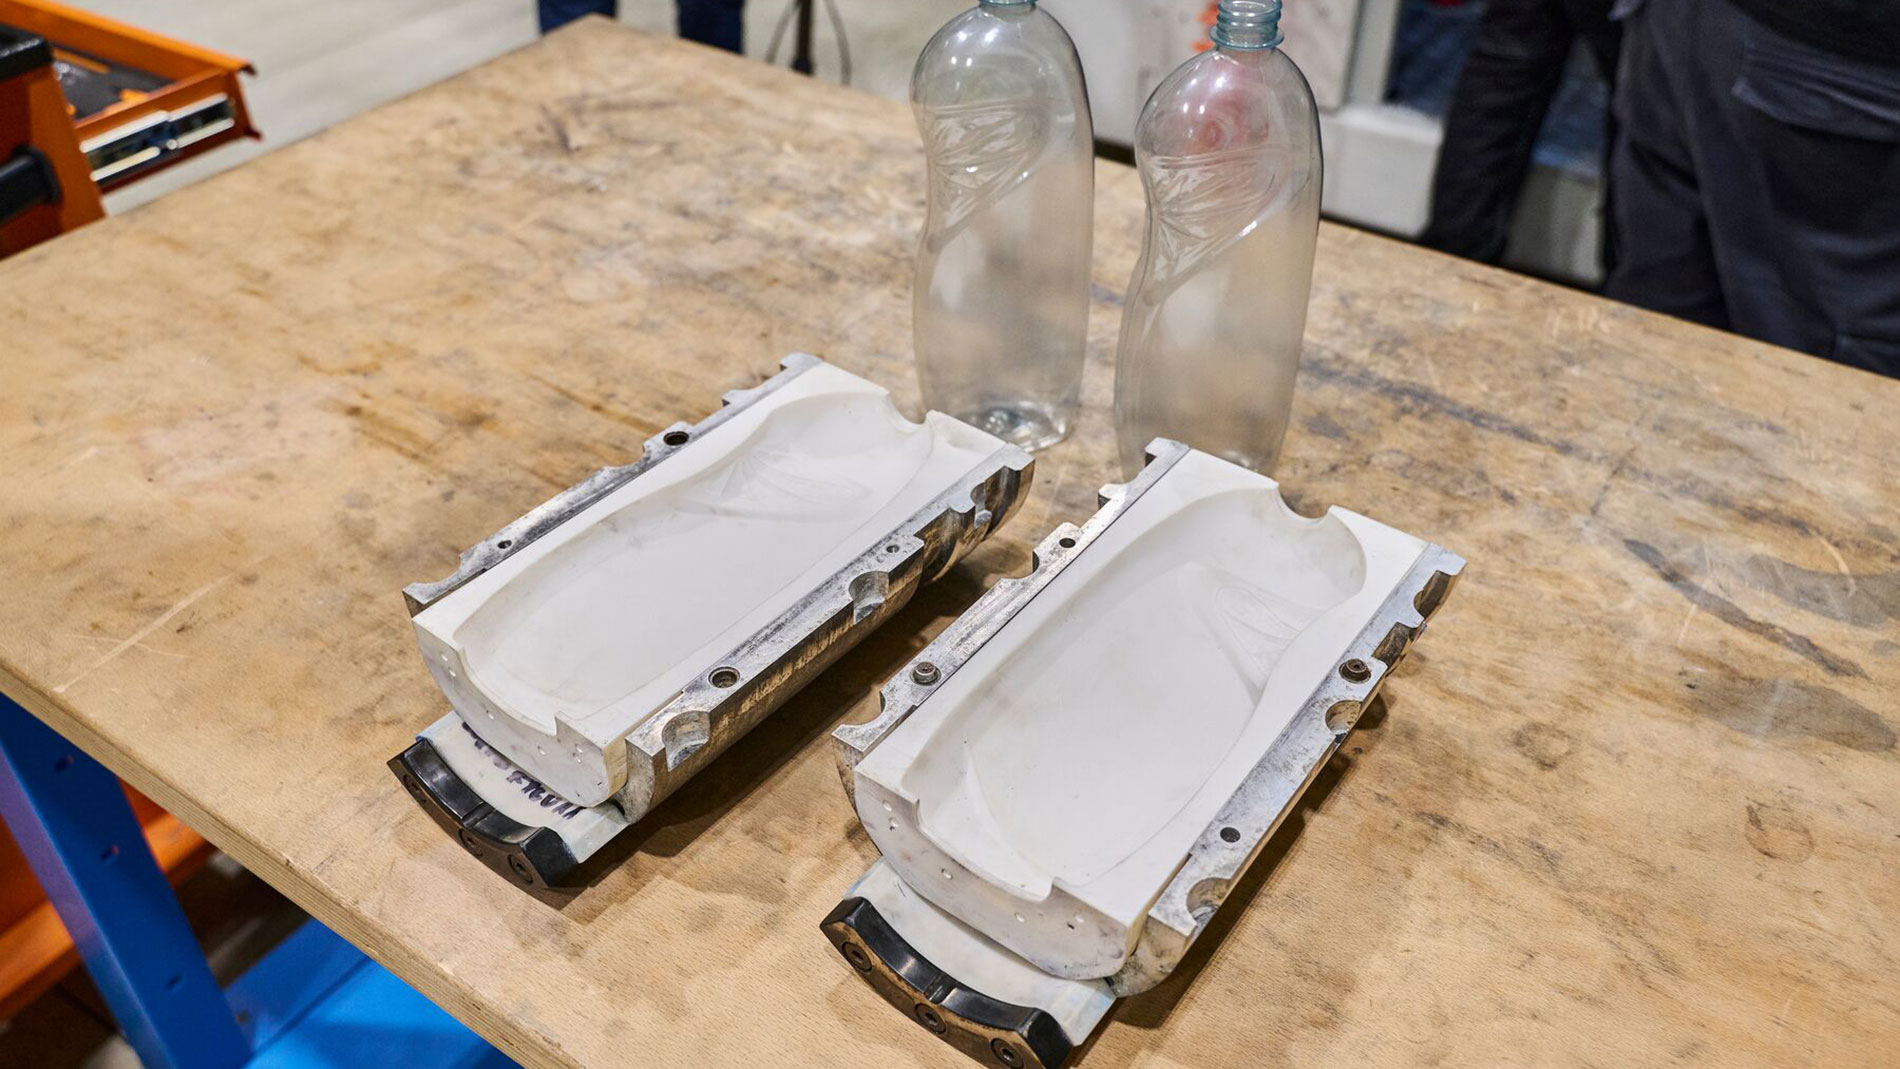 Serioplast fabricated precise molds. Image: Formlabs